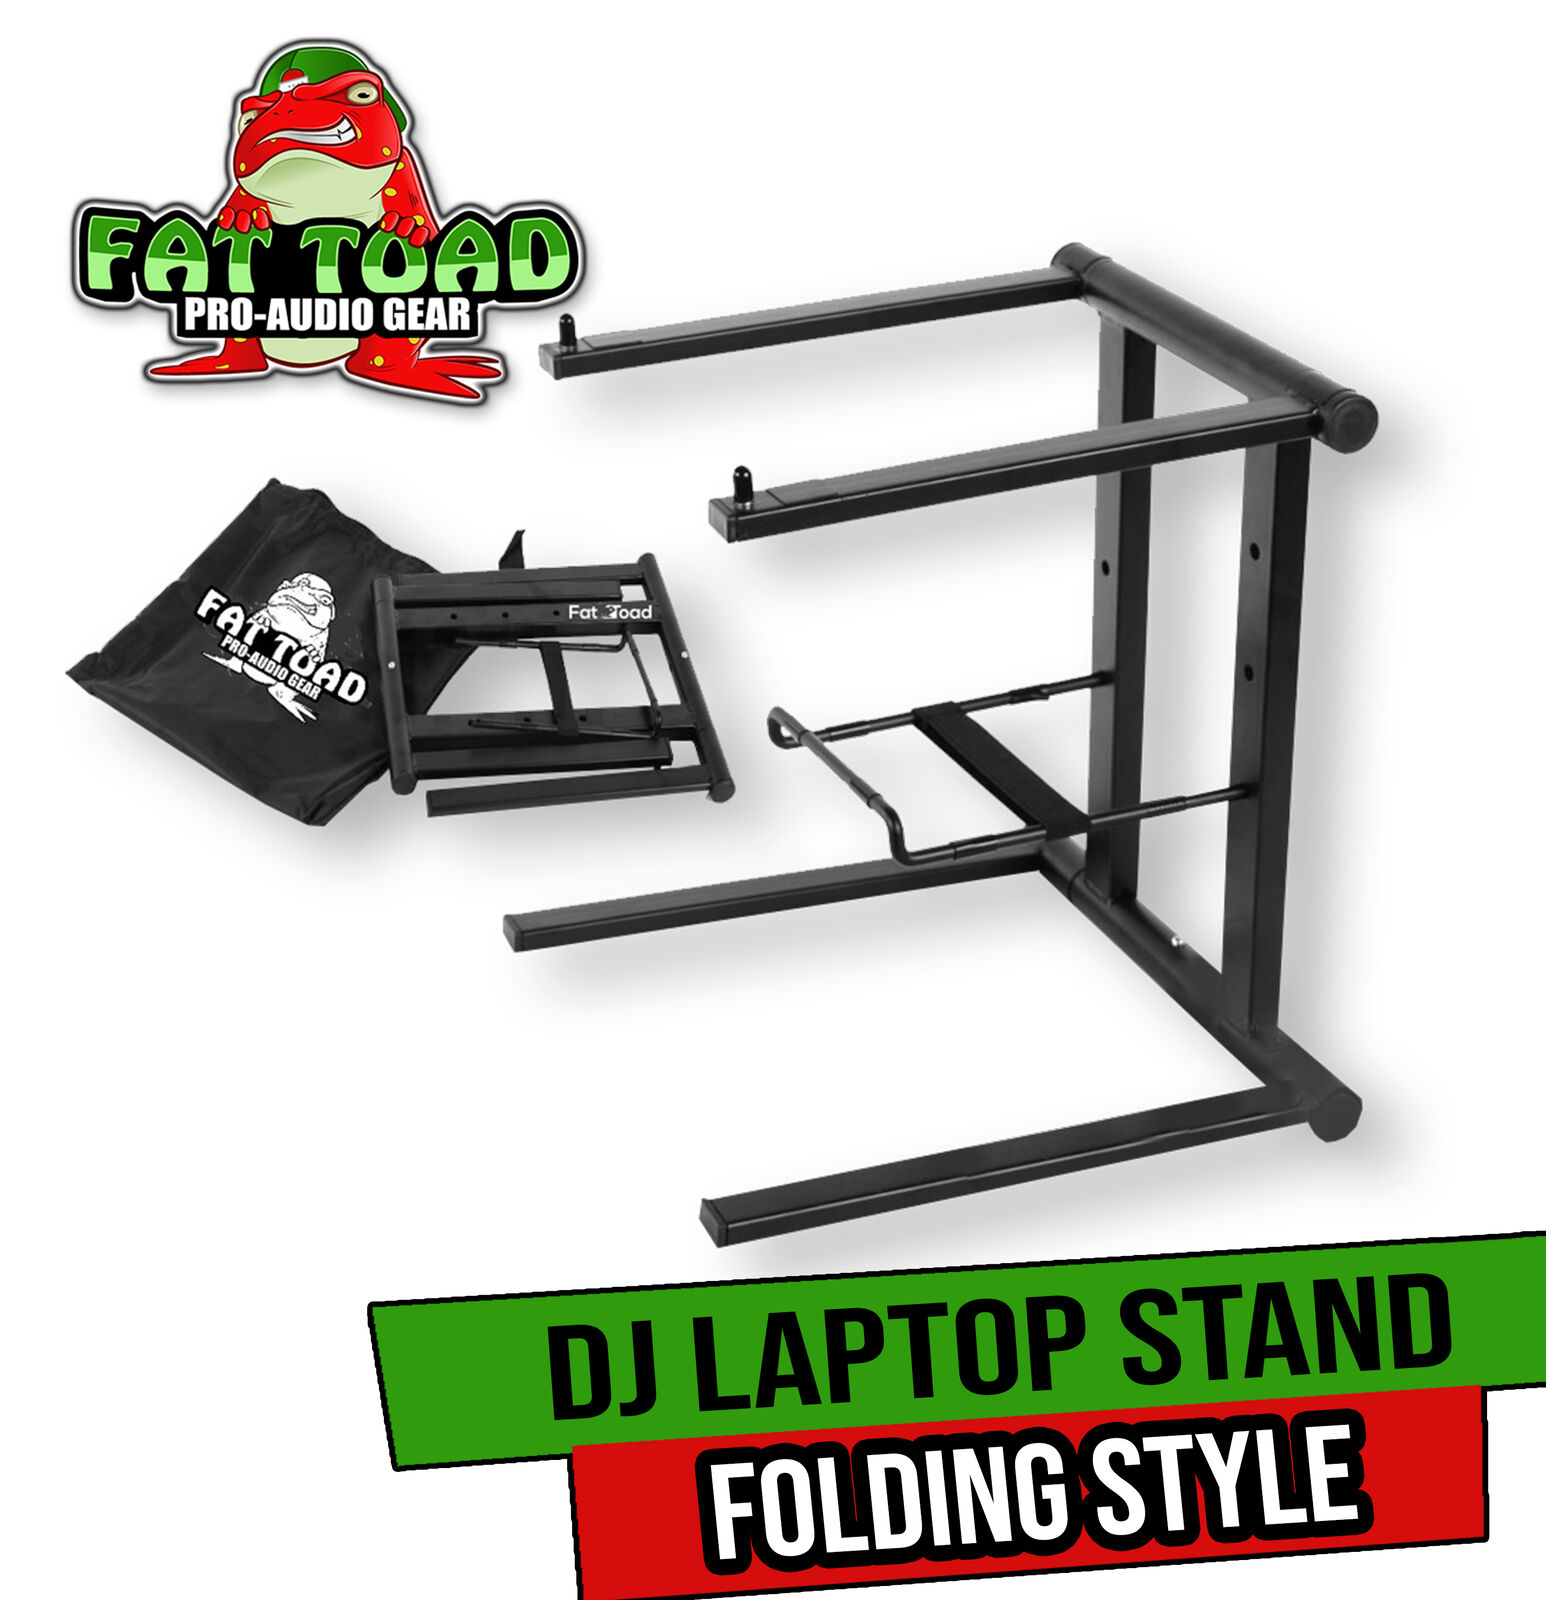 Folding DJ Laptop Stand with Sub-tray Shelf FAT TOAD | Pro Audio Computer Table